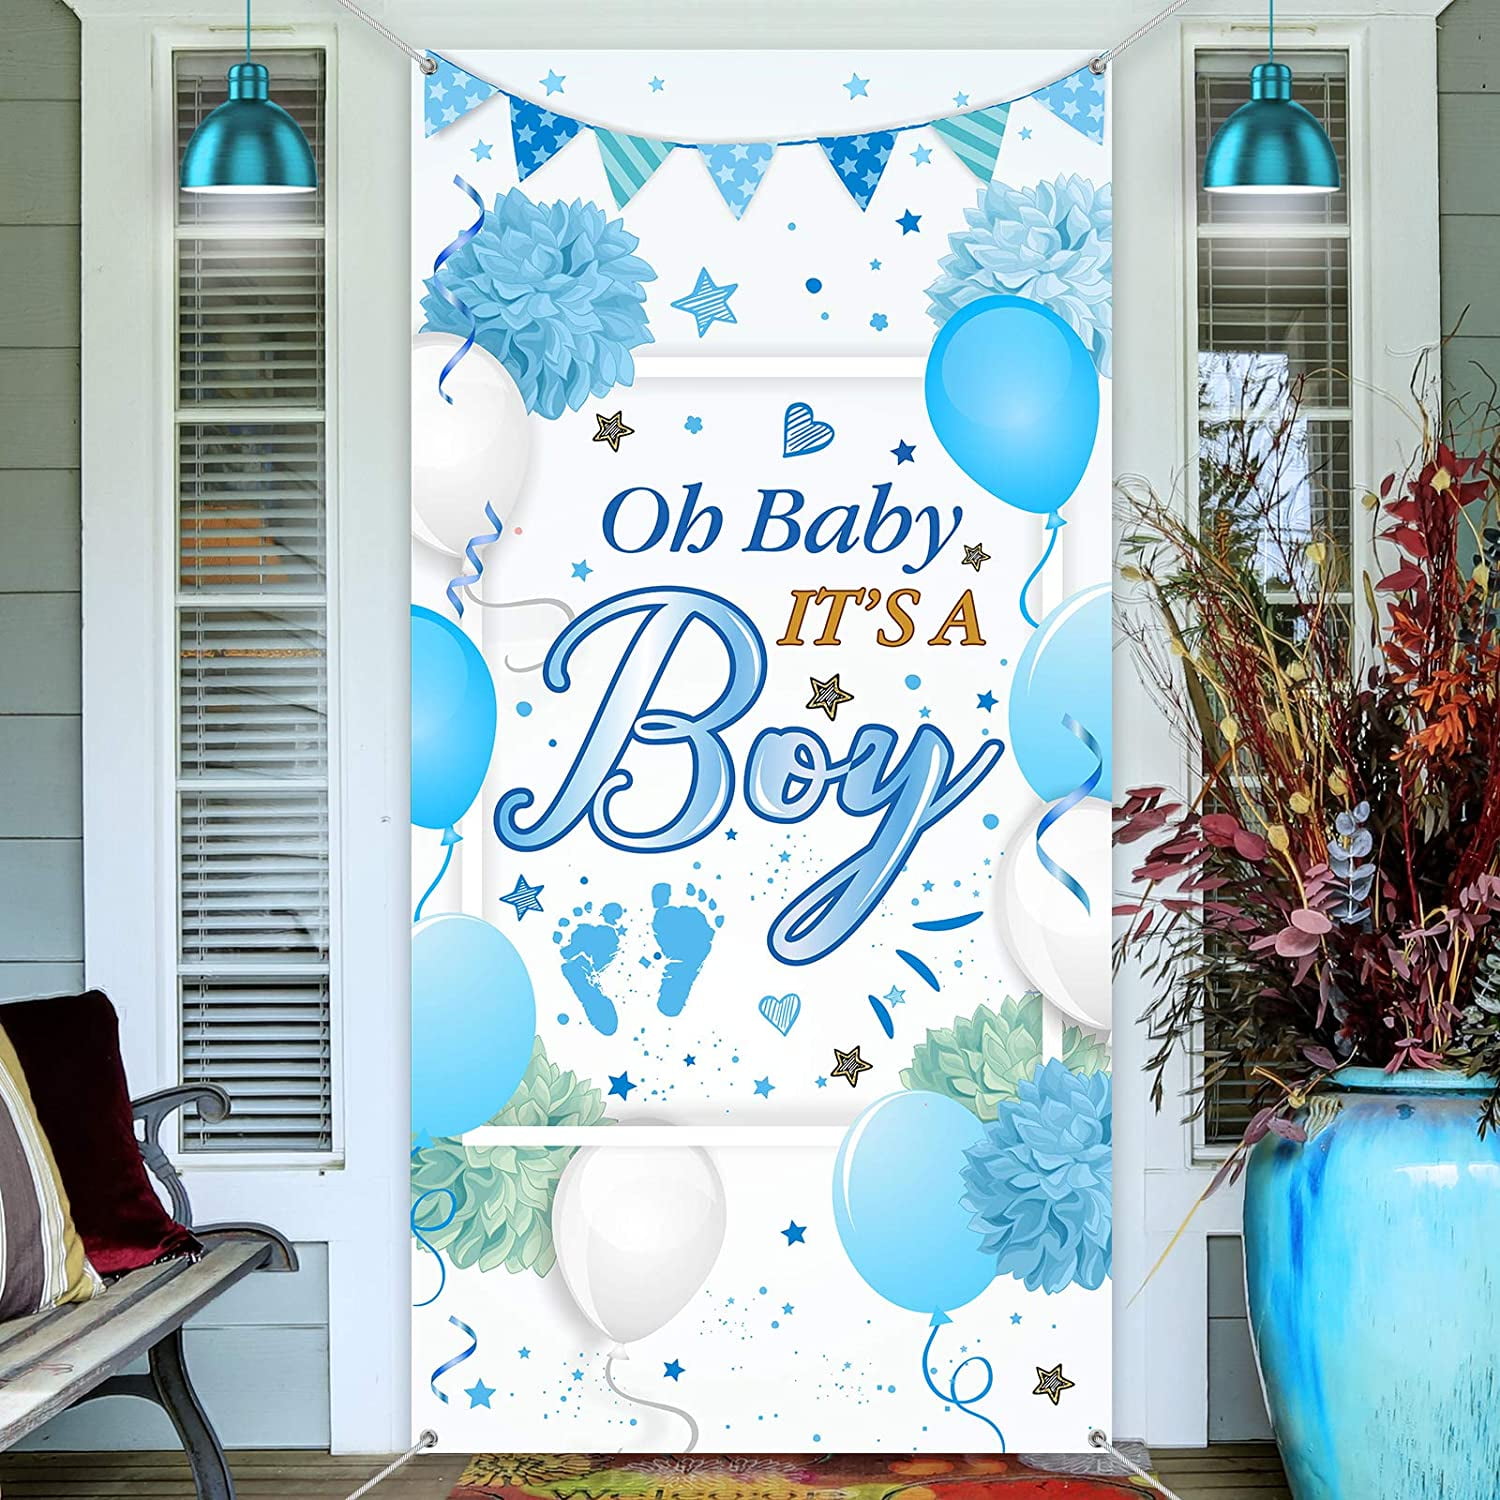 Its a Boy Baby Shower Banner Vinyl Photo Background Wall Hanging Party Decorations Backdrop HZ-1142